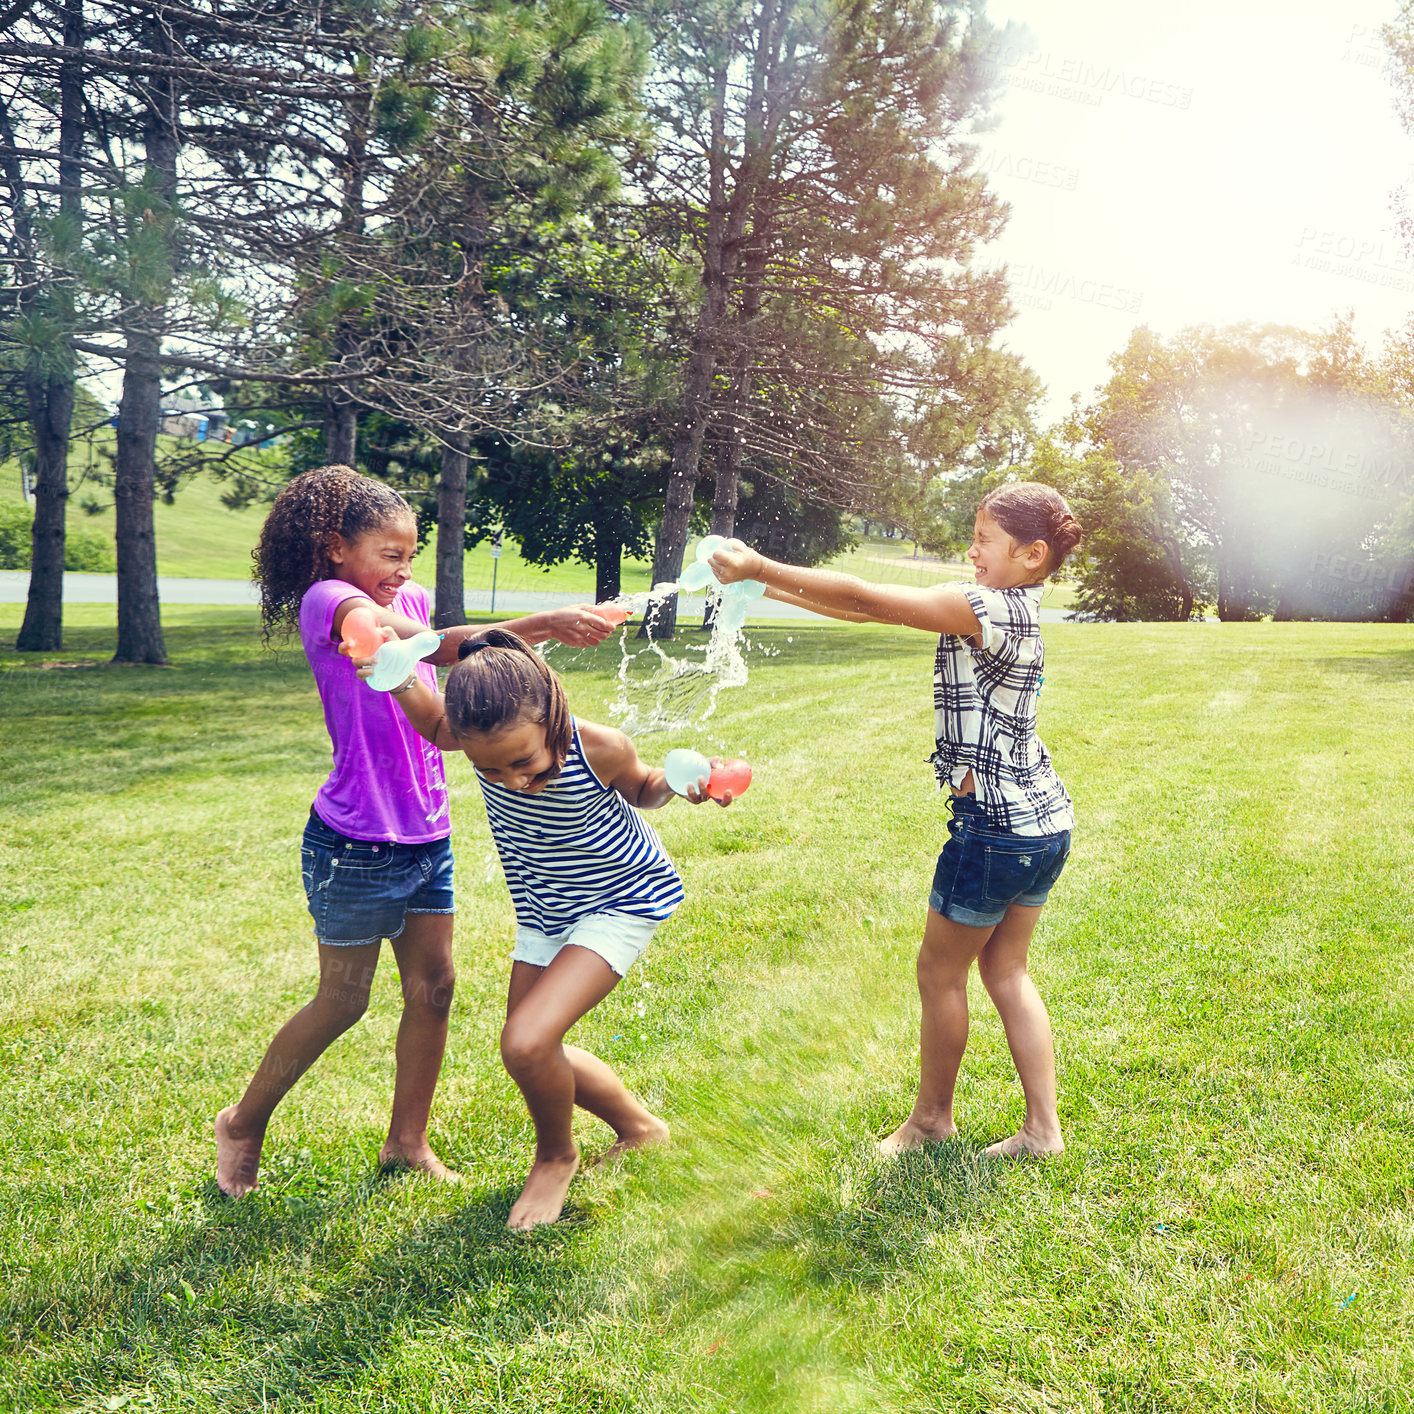 Buy stock photo Shot of adorable little girls playing with water balloons outdoors